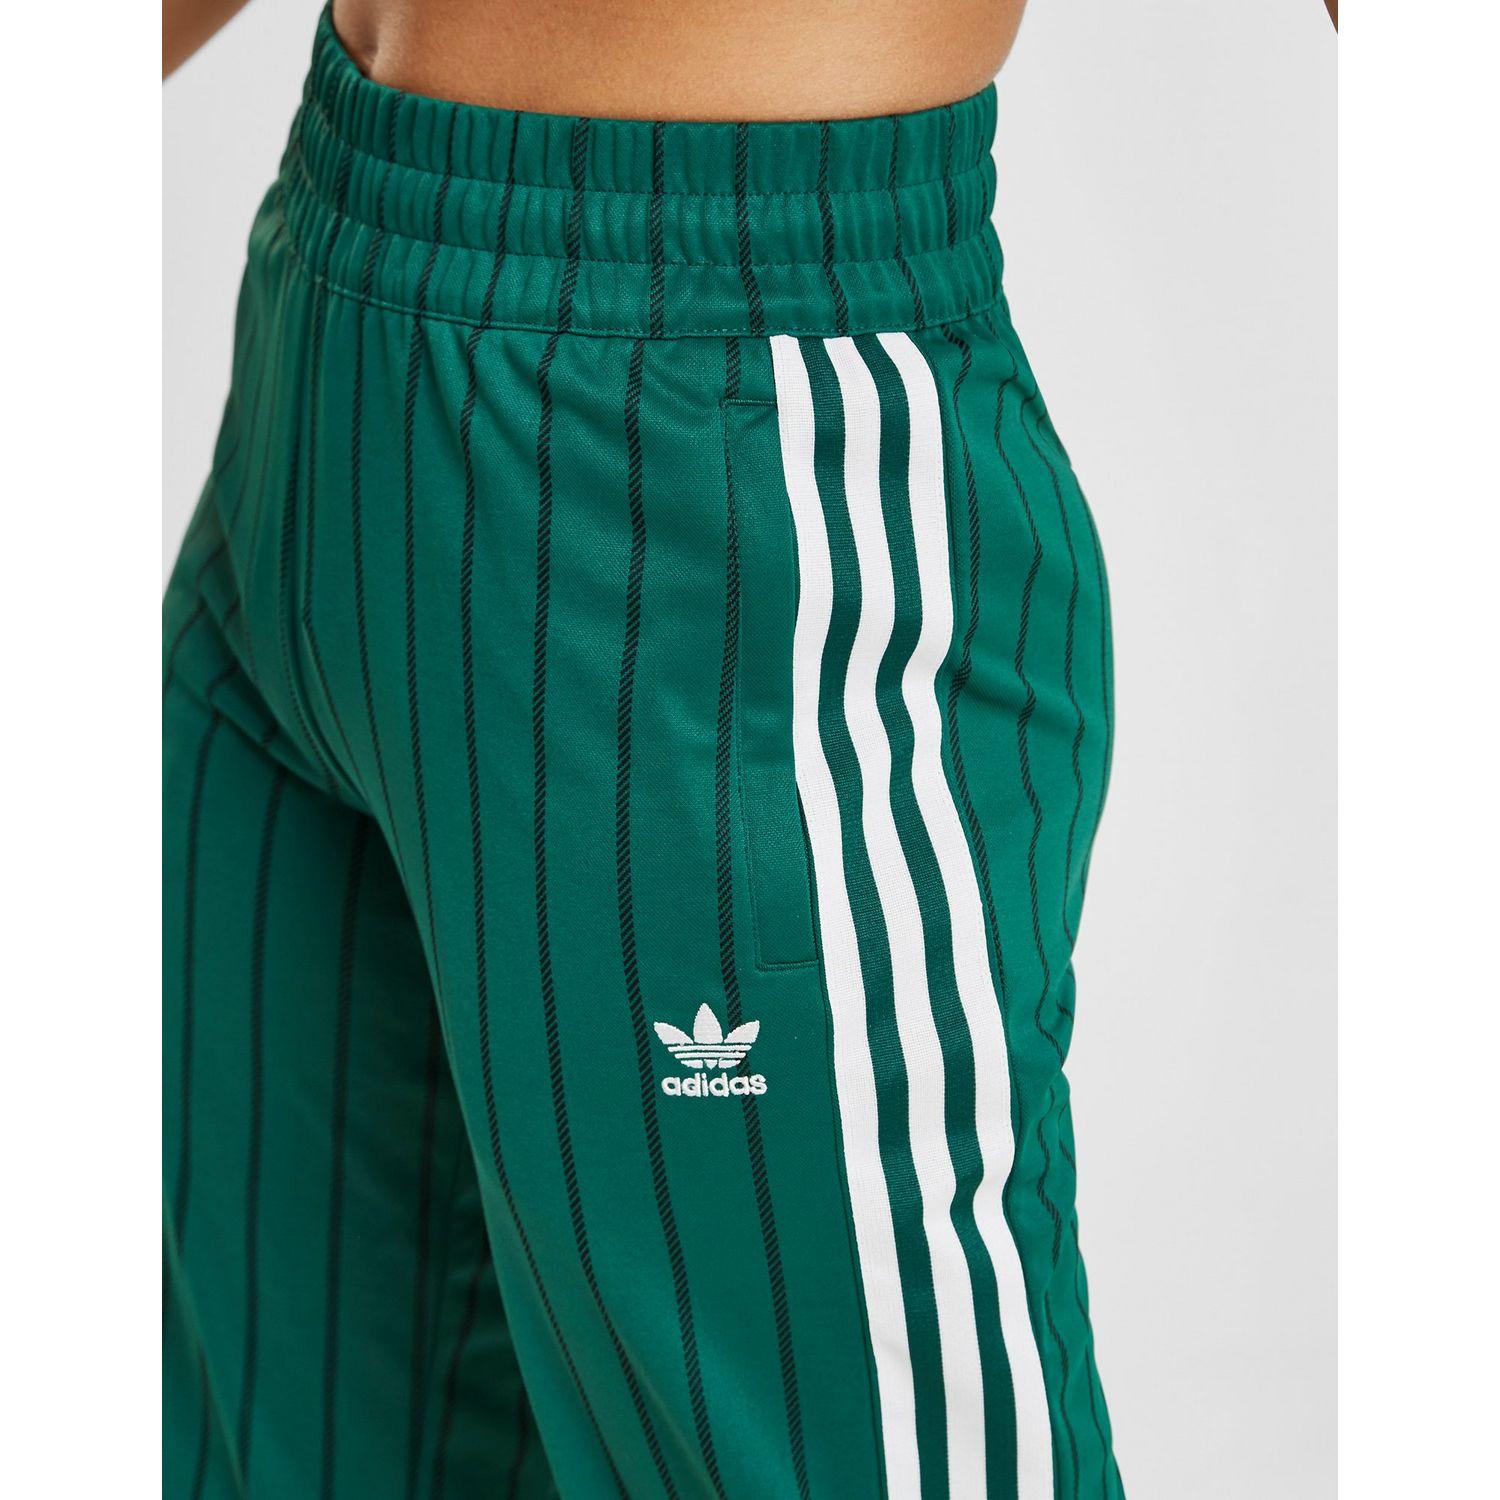 adidas pants with green stripes